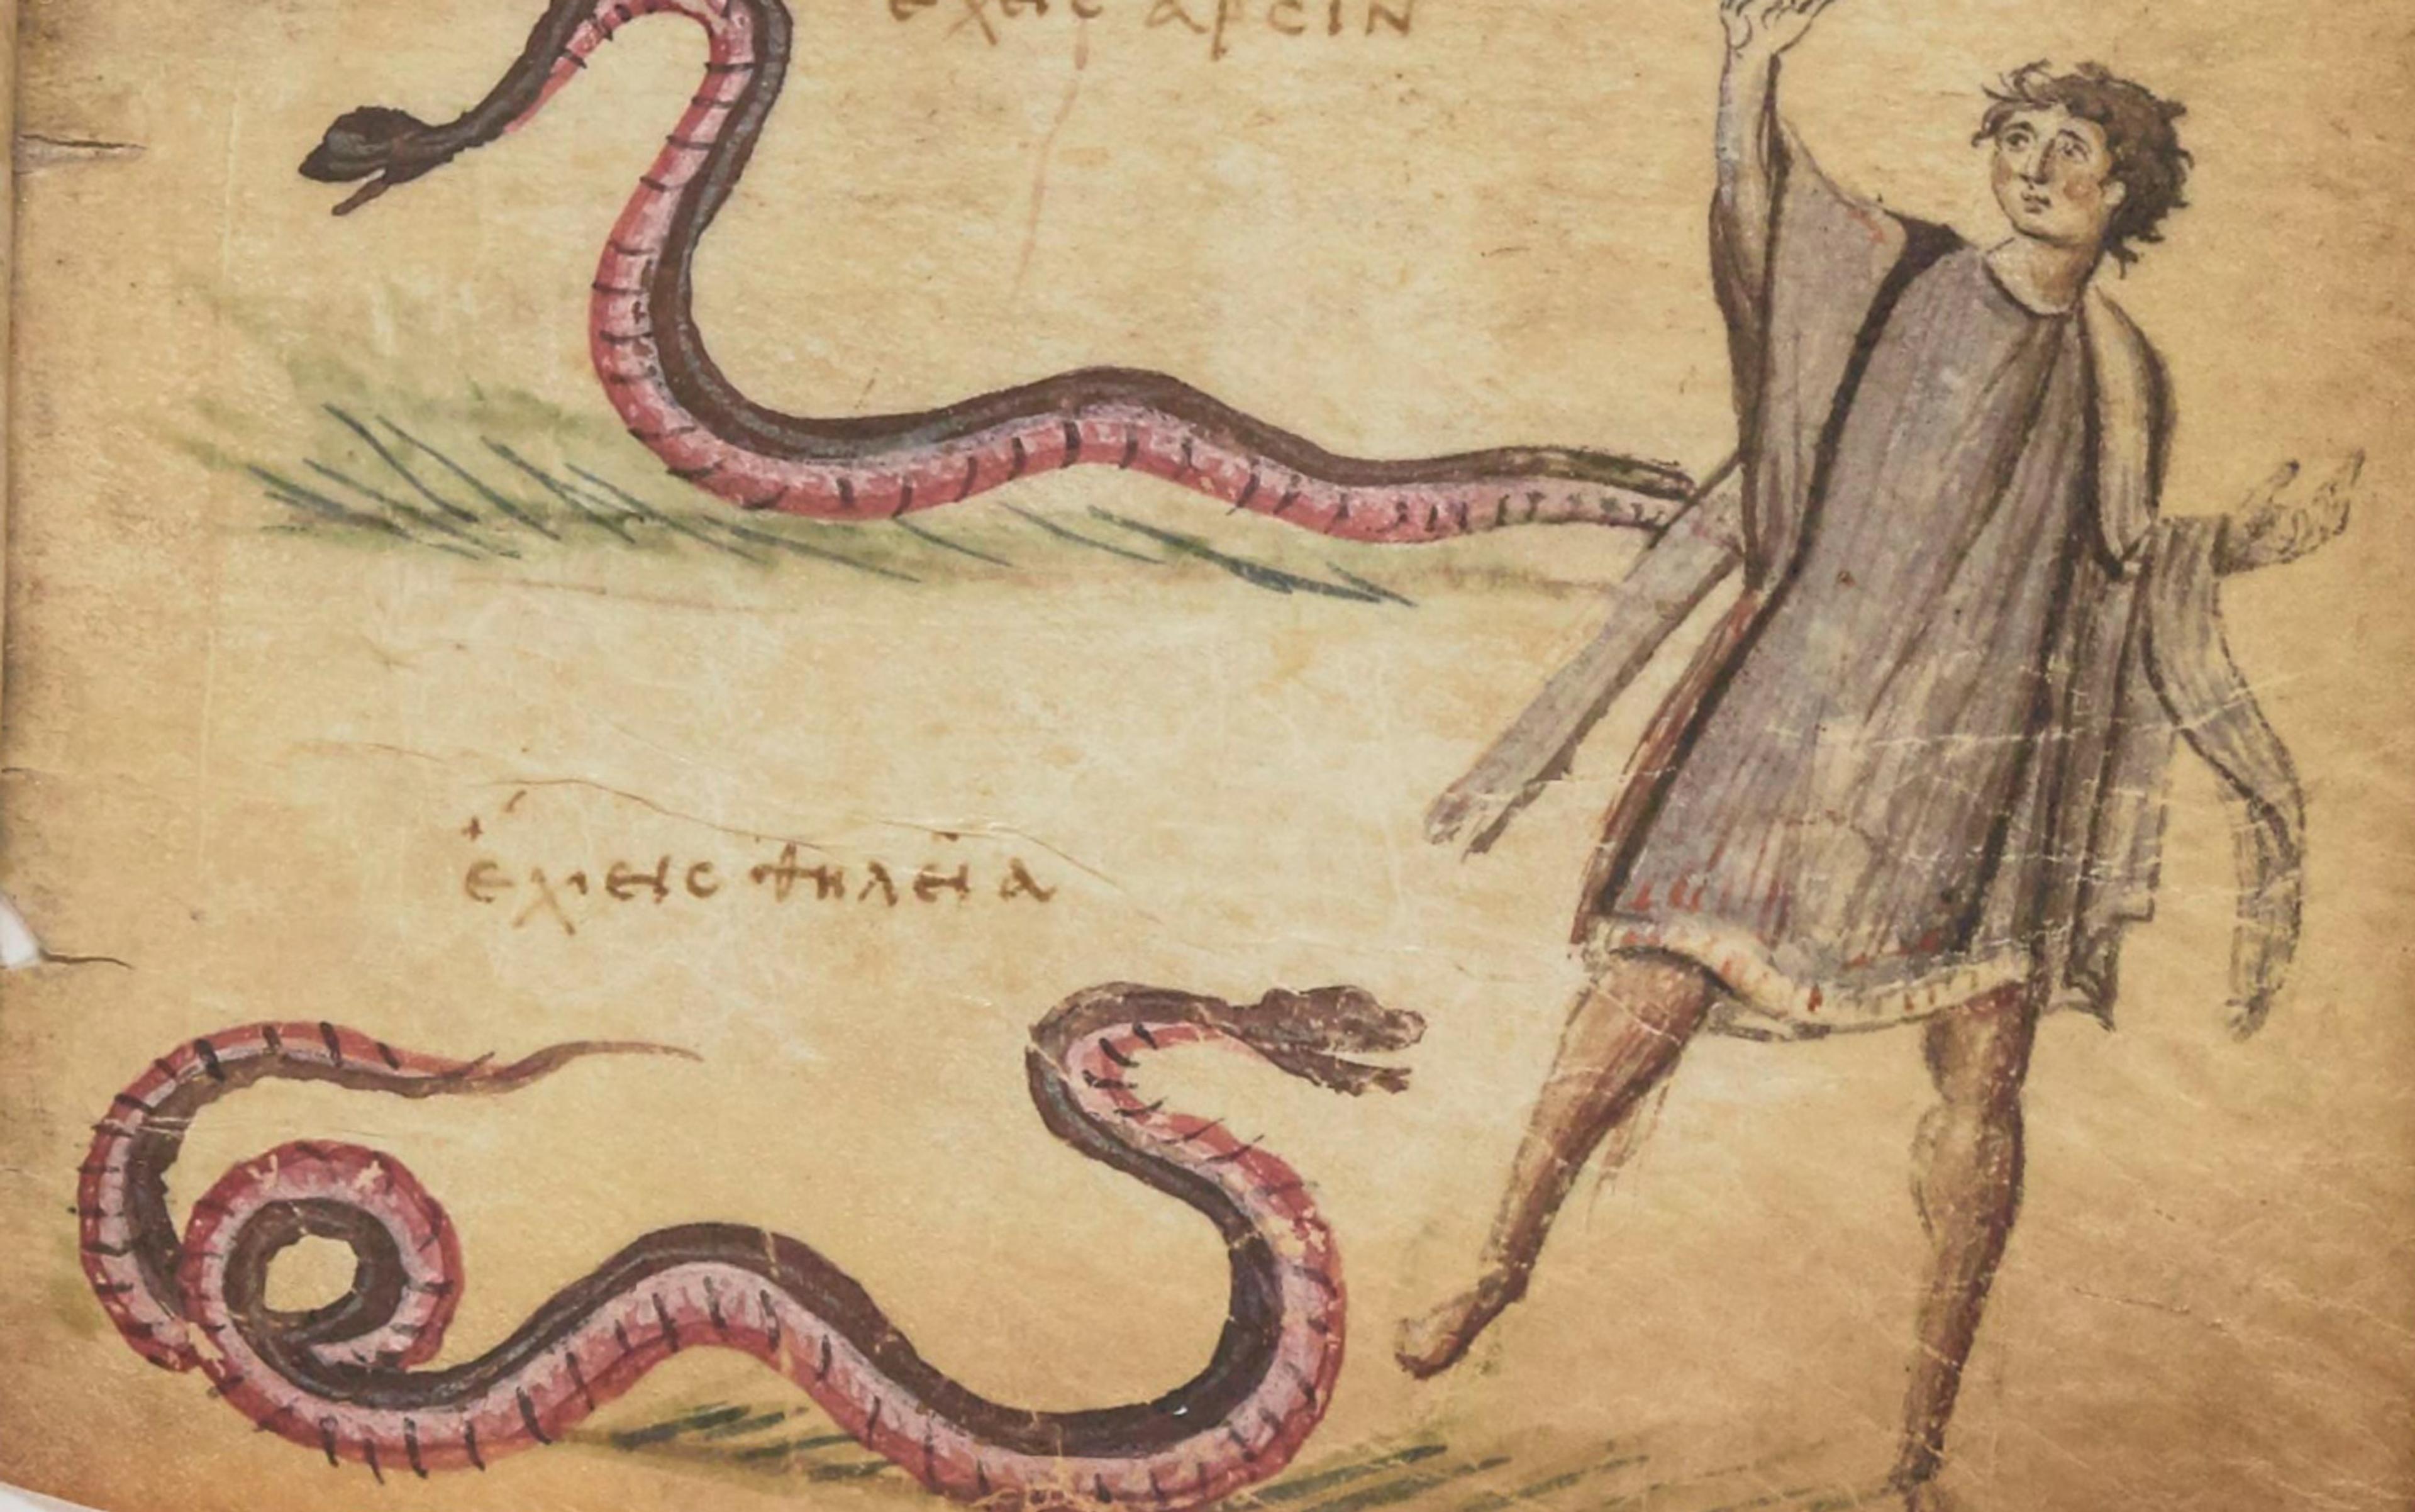 Medieval manuscript illustration of a man gesturing towards two red and black snakes, with Greek text above and below the images, on a faded parchment background.